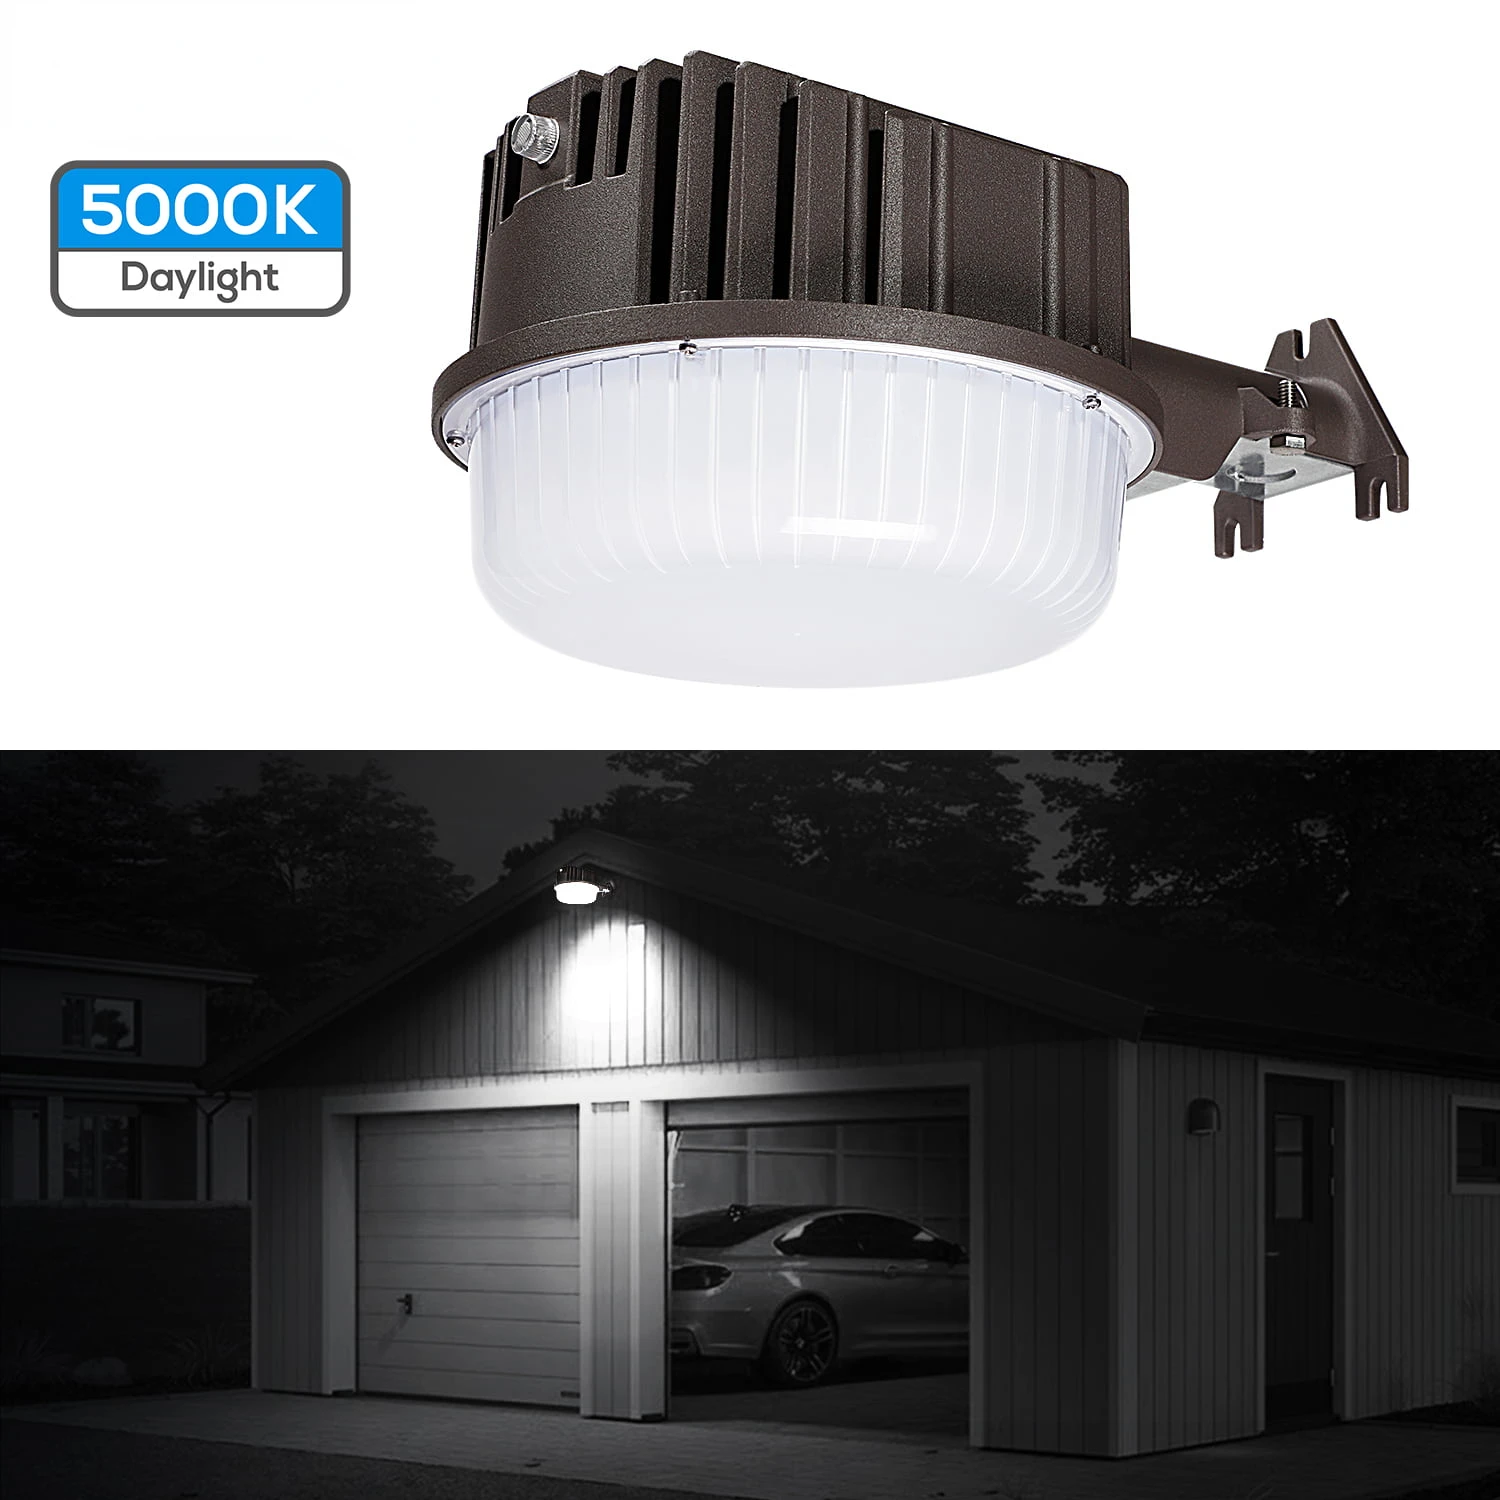 Free Shipping Dusk to Dawn Barn Light, LED 80W Security Lights, 800W Equivalent， 5000K Daylight